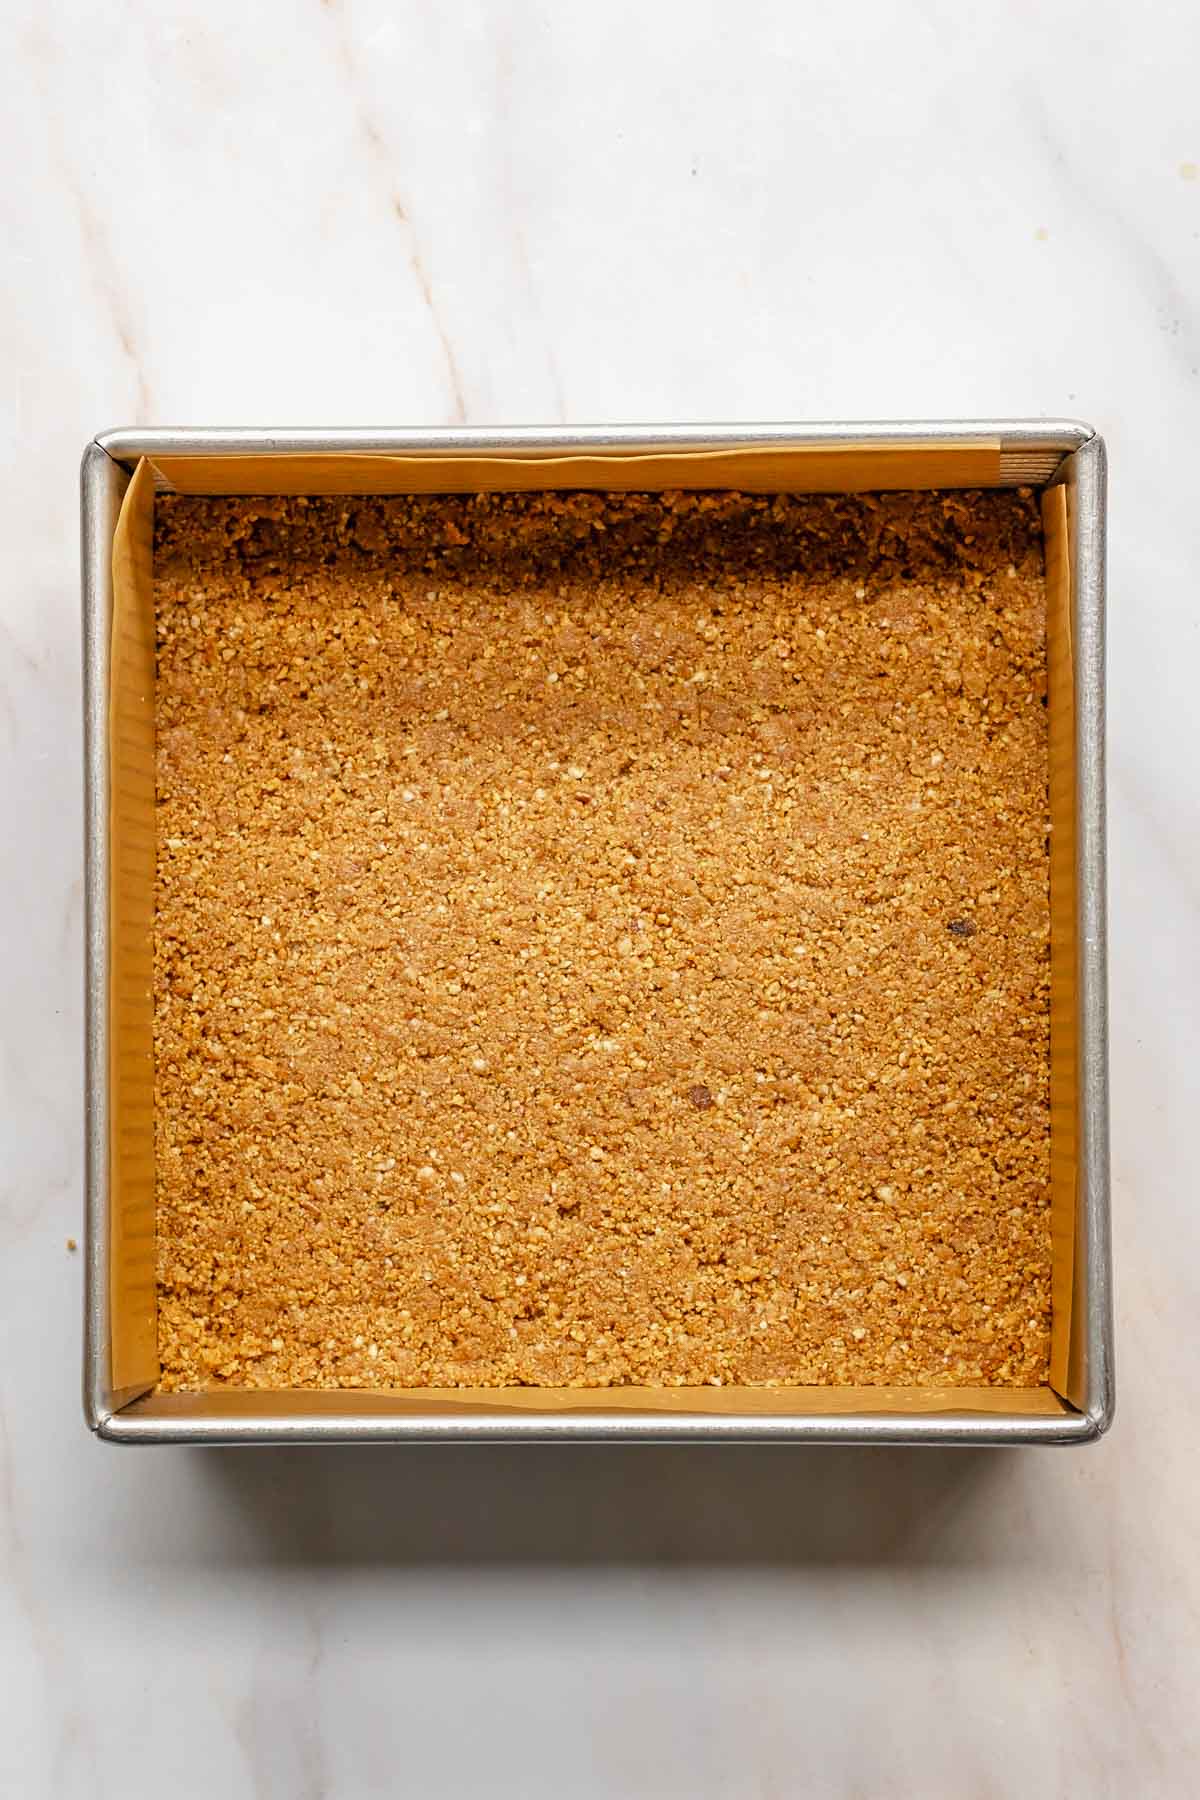 Graham cracker crust pressed into a square pan.